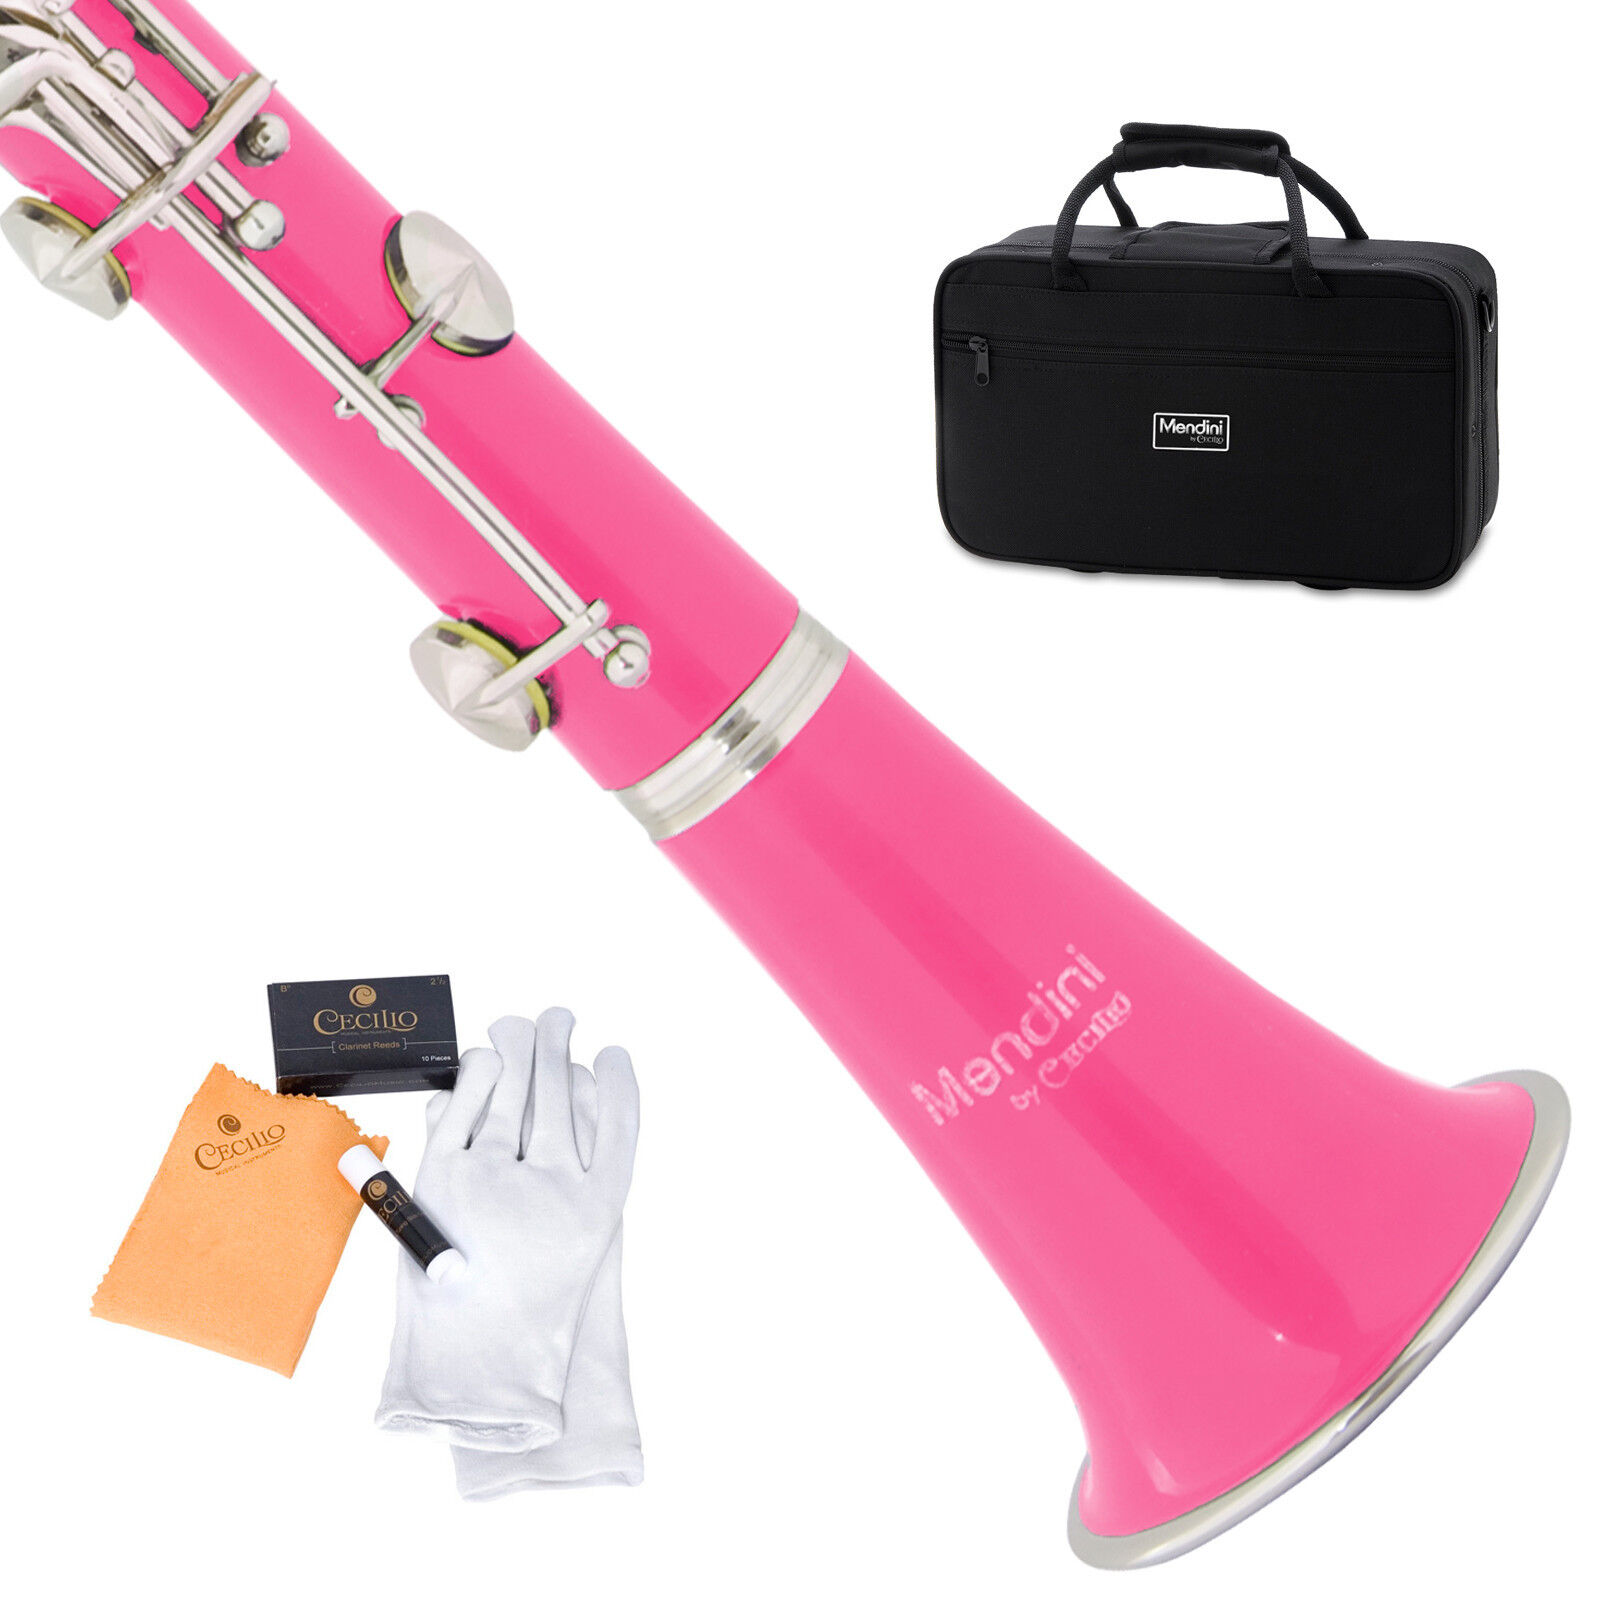 MENDINI PINK ABS Bb CLARINET W/ CASE,CARE KIT,11 REEDS FOR STUDENT, BEGINNER